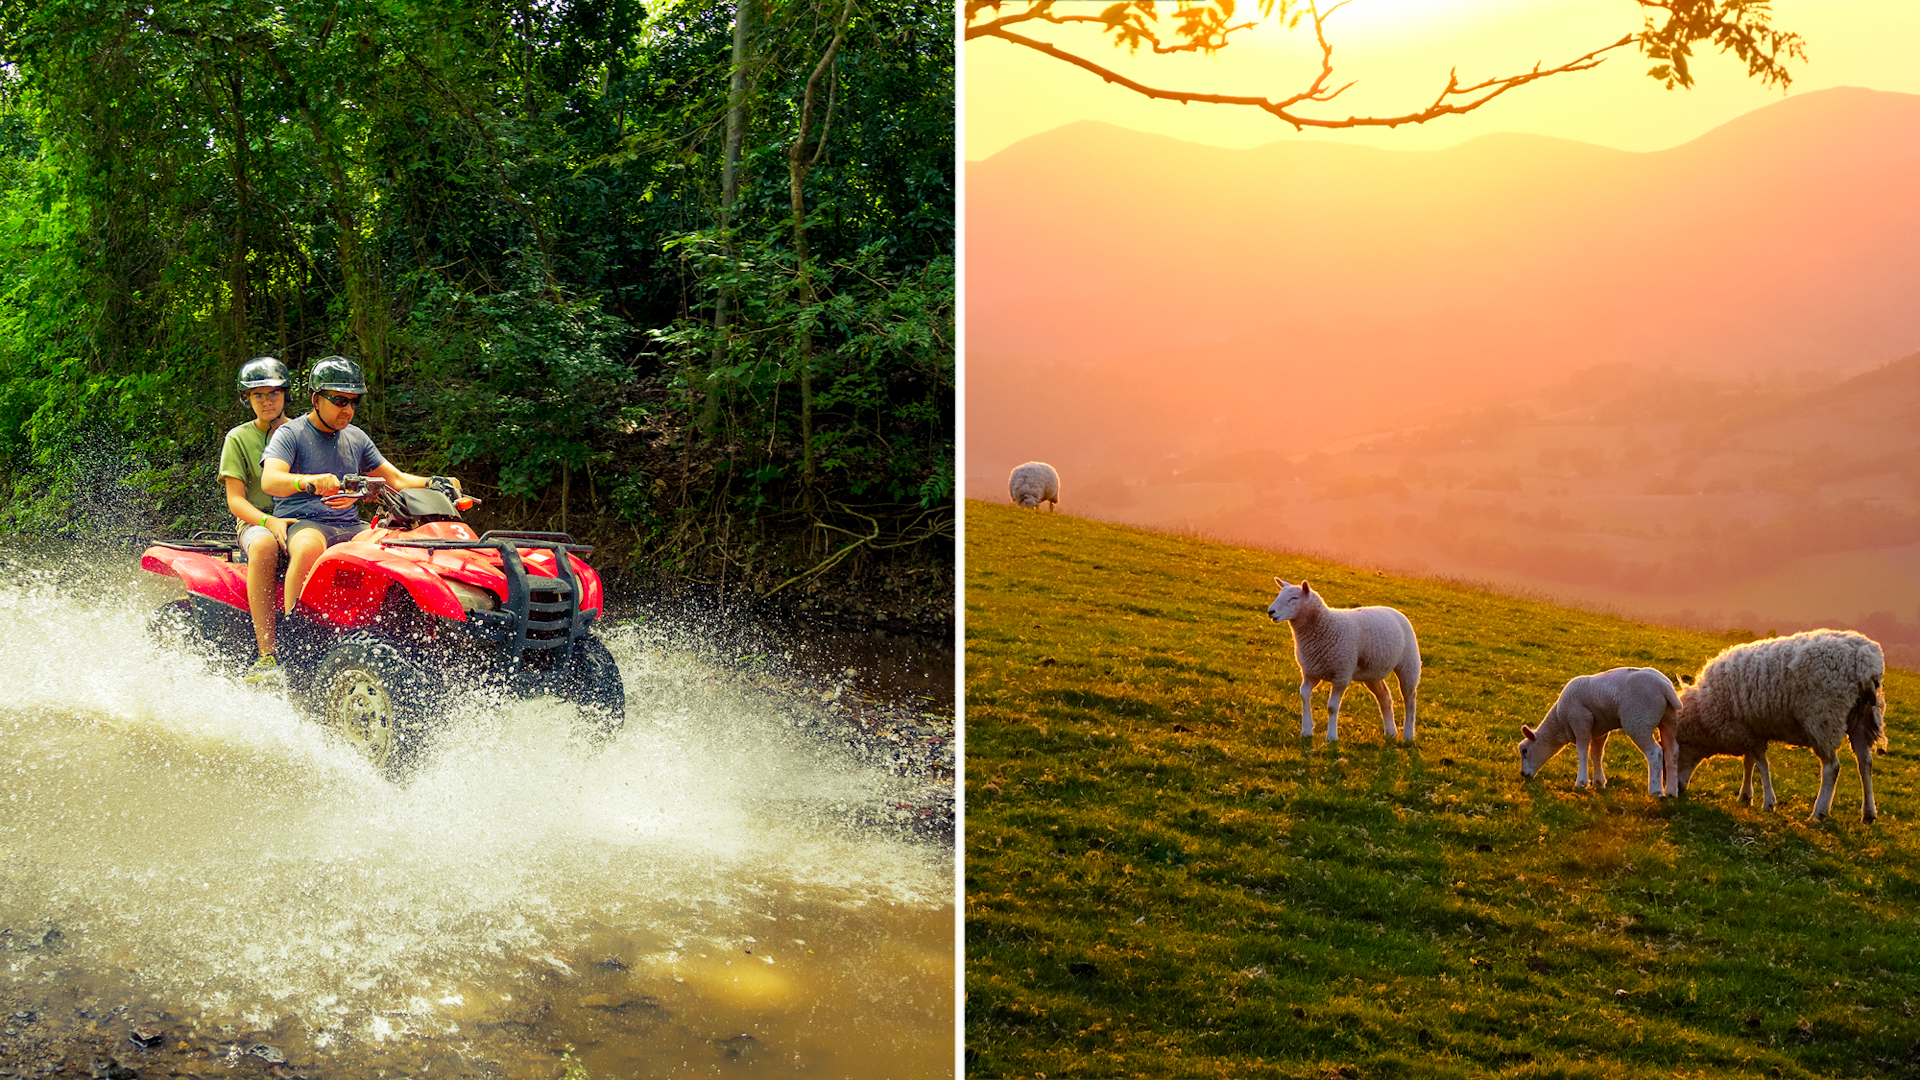 A split image which on the left shows two people riding a 4x4 quad bike in Costa Rica, and on the right is an image of Welsh mountain sheep standing on the hills above Llangollen, North Wales. 